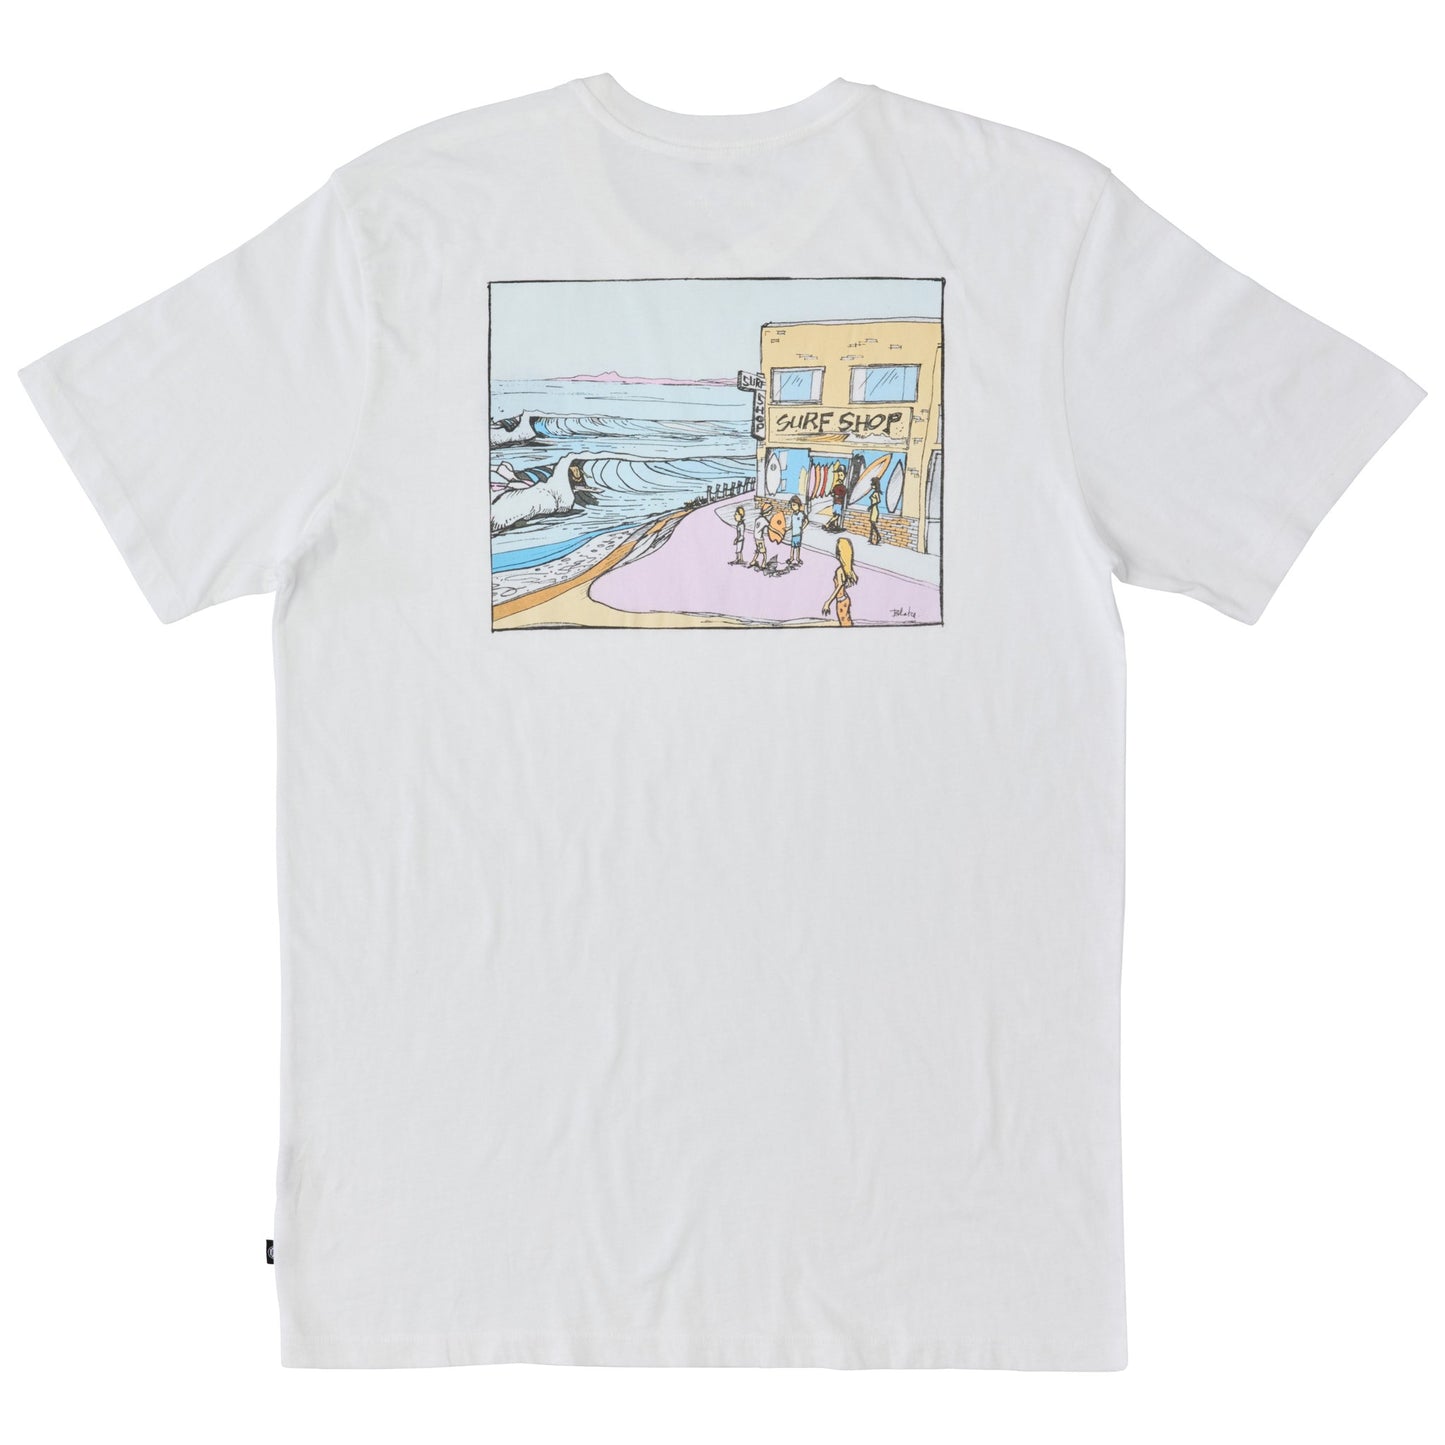 IPD MENS SURF SHOP TEE